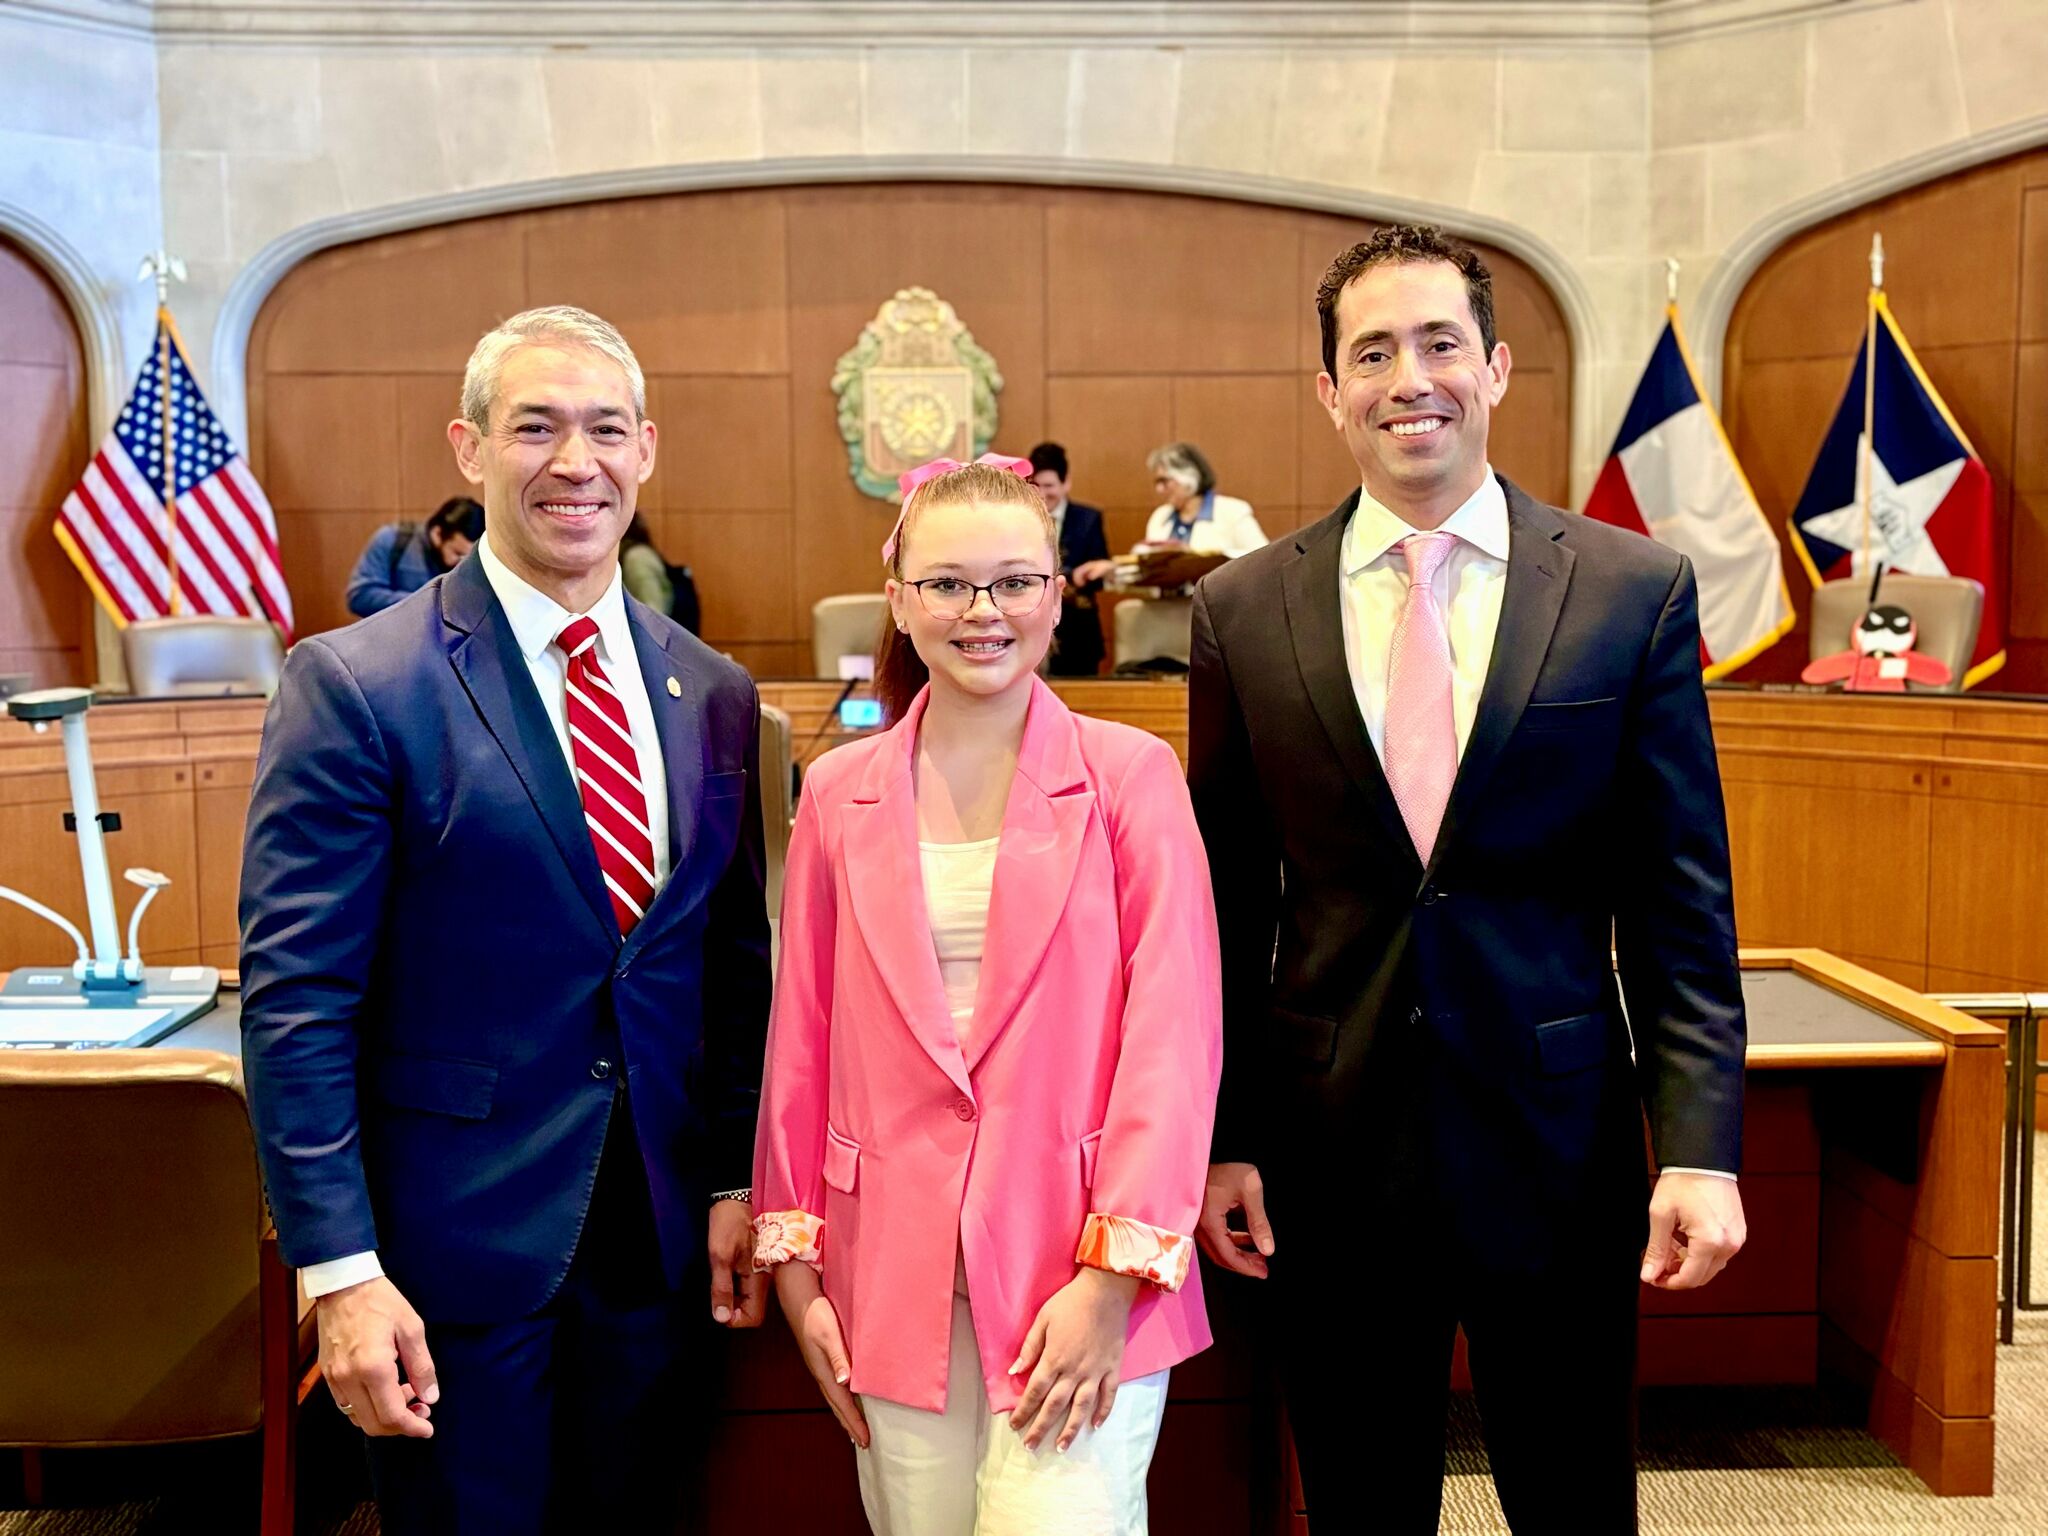 San Antonio's Kids Baking Champion honored again by City Council